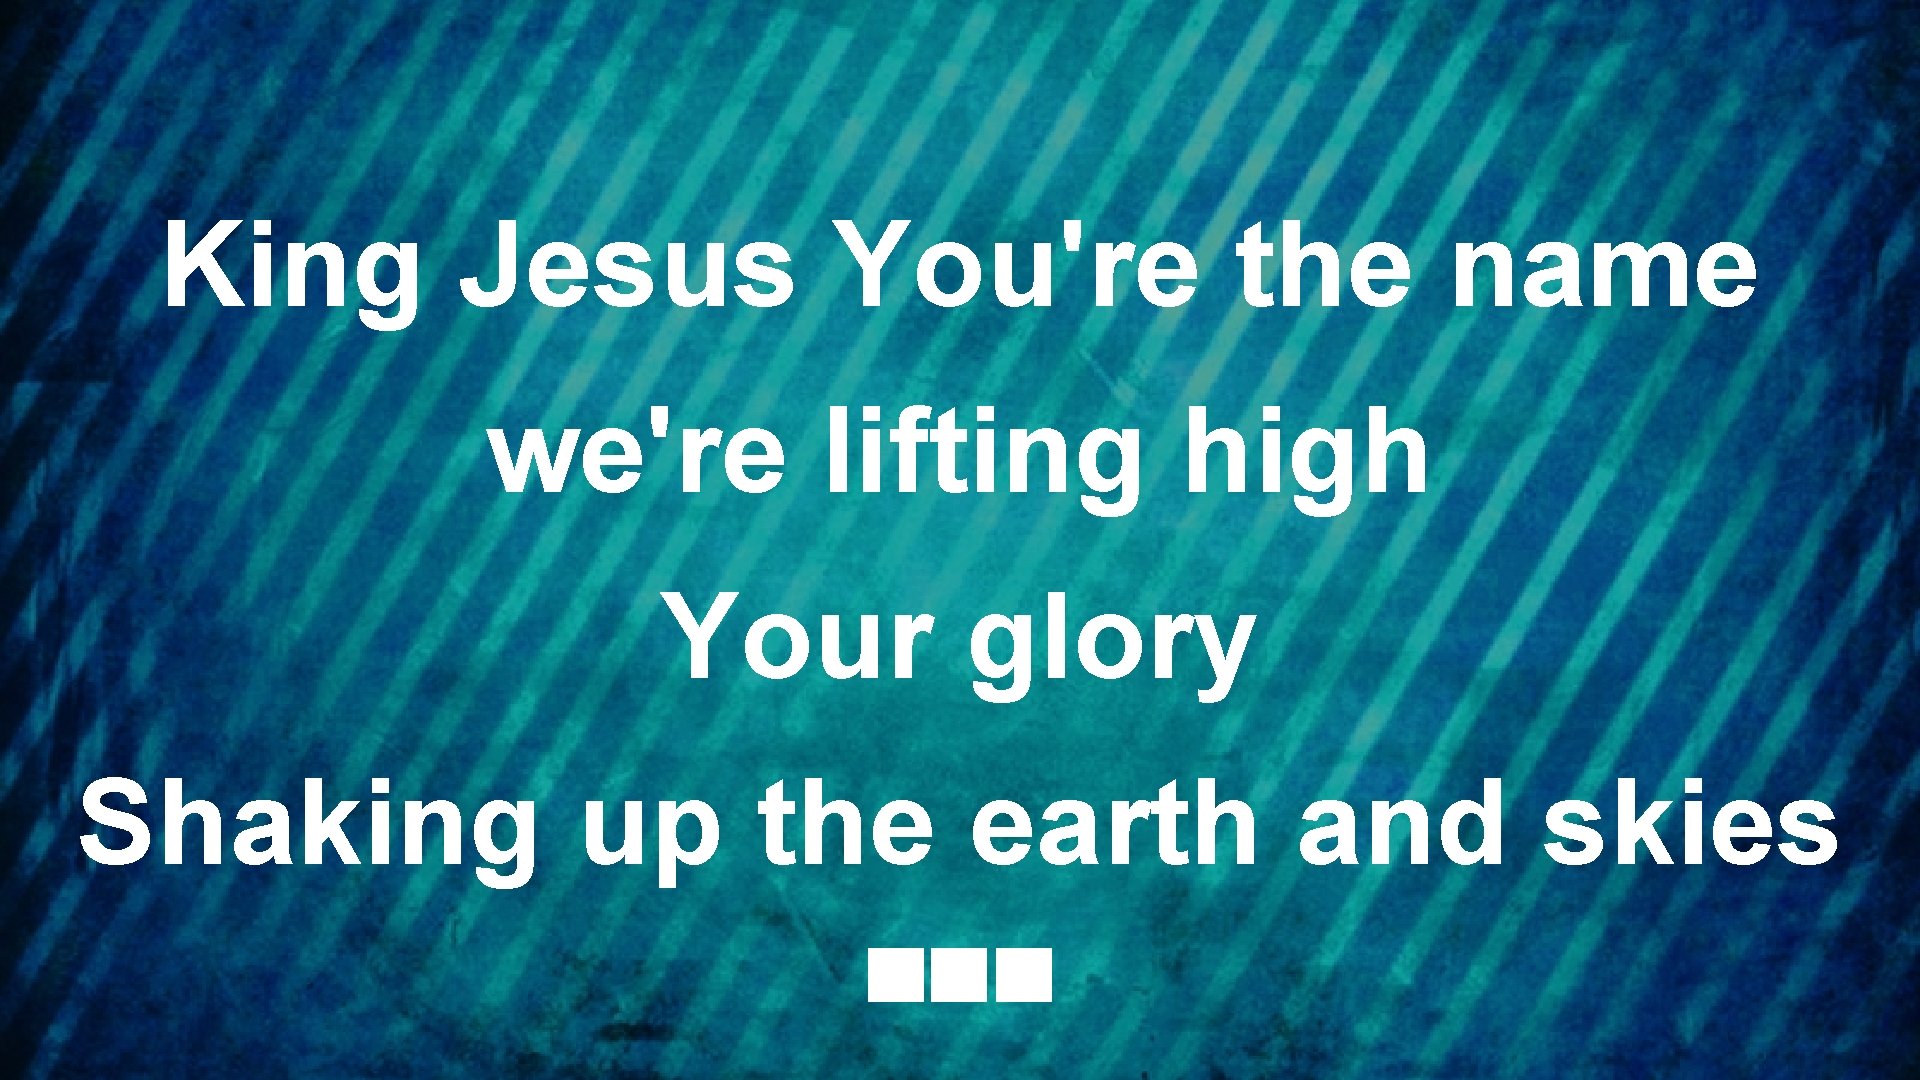 King Jesus You're the name we're lifting high Your glory Shaking up the earth